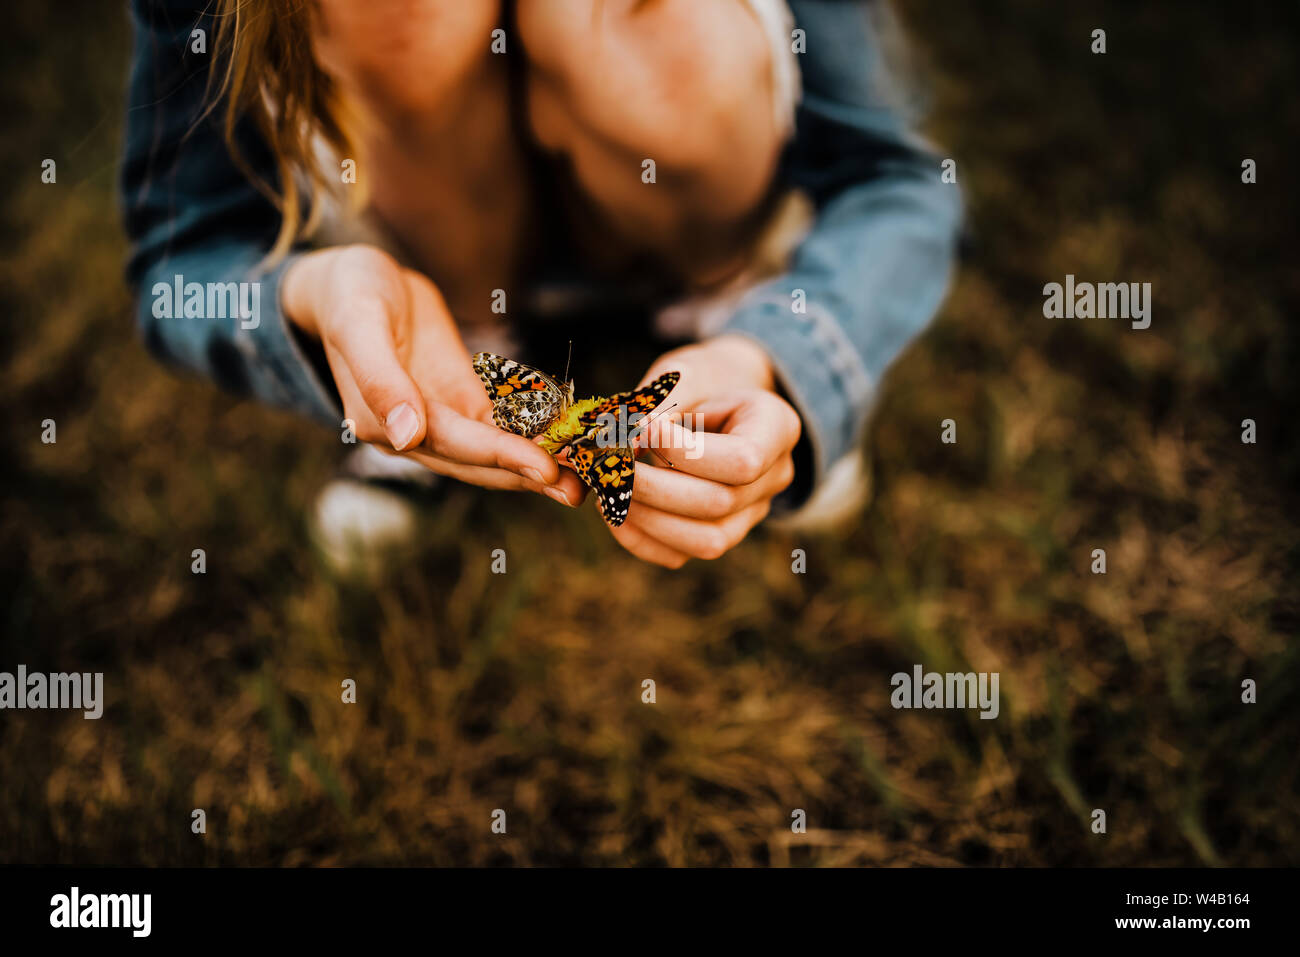 9 YEAR OLD GIRL HOLDING TWO BUTTERFLIES Stock Photo